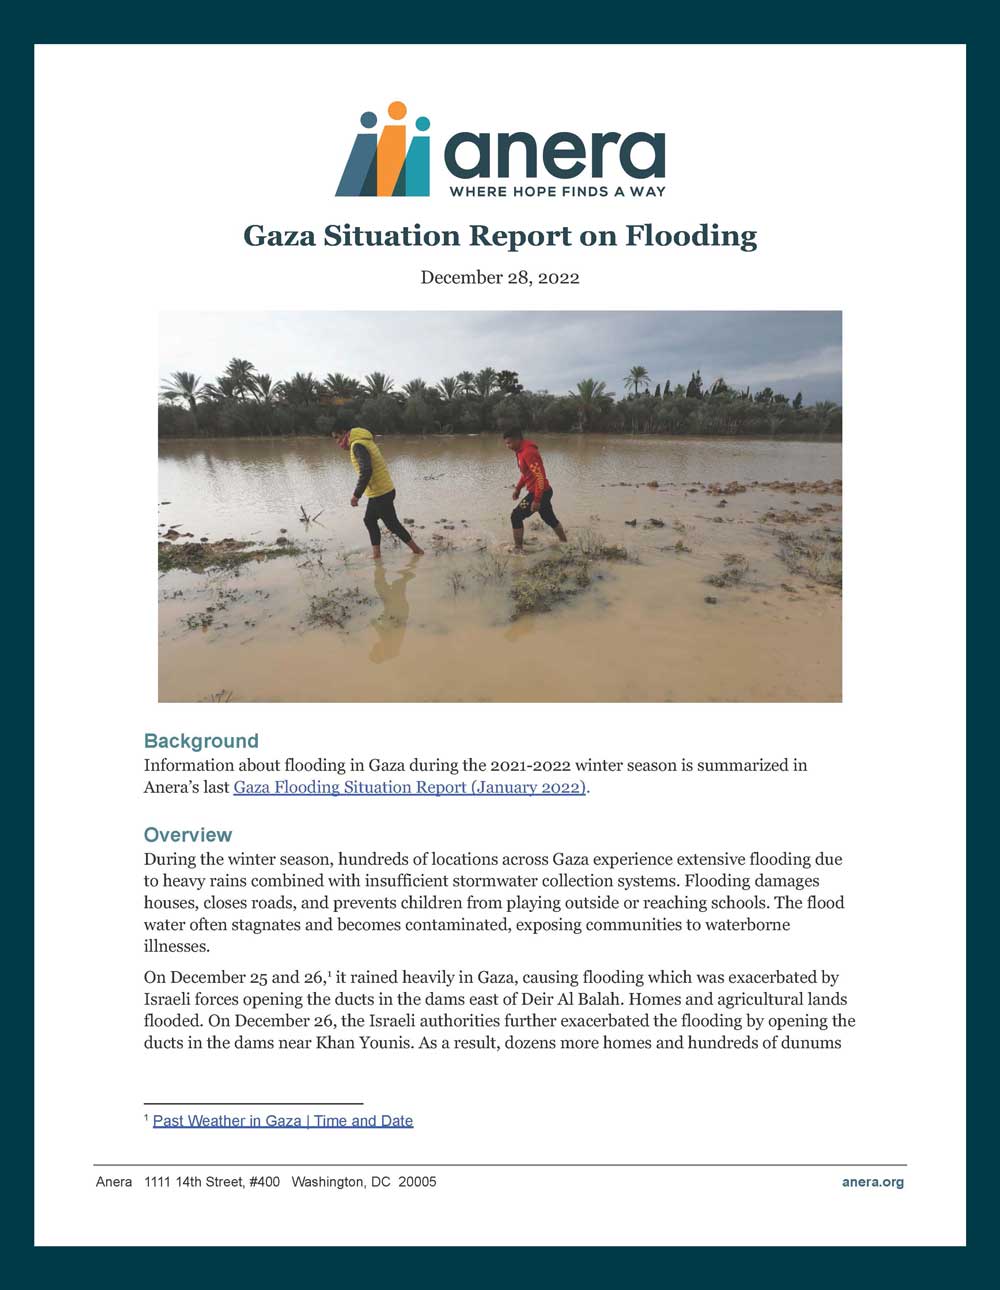 First page of the situation report on the flooding in Gaza, December 2022.